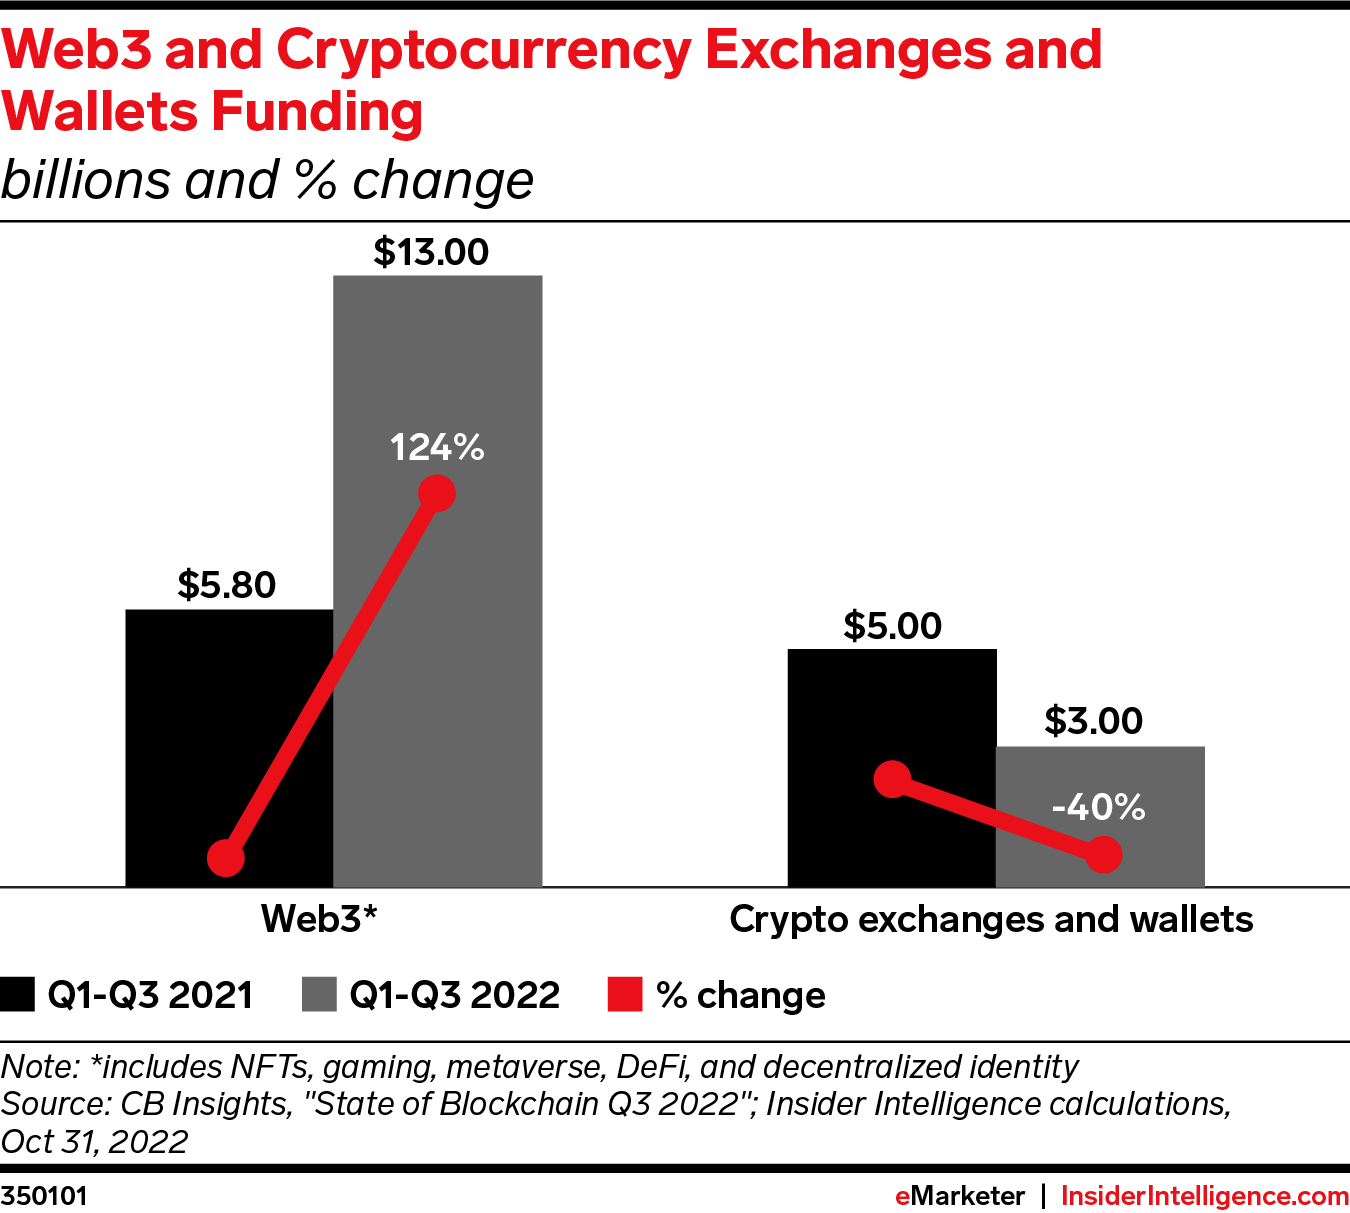 Web3 Funding Soared in 2022, While Crypto Exchanges and Wallets Plunged, Q1-Q3 2021 vs. Q1-Q3 2022 (% change)